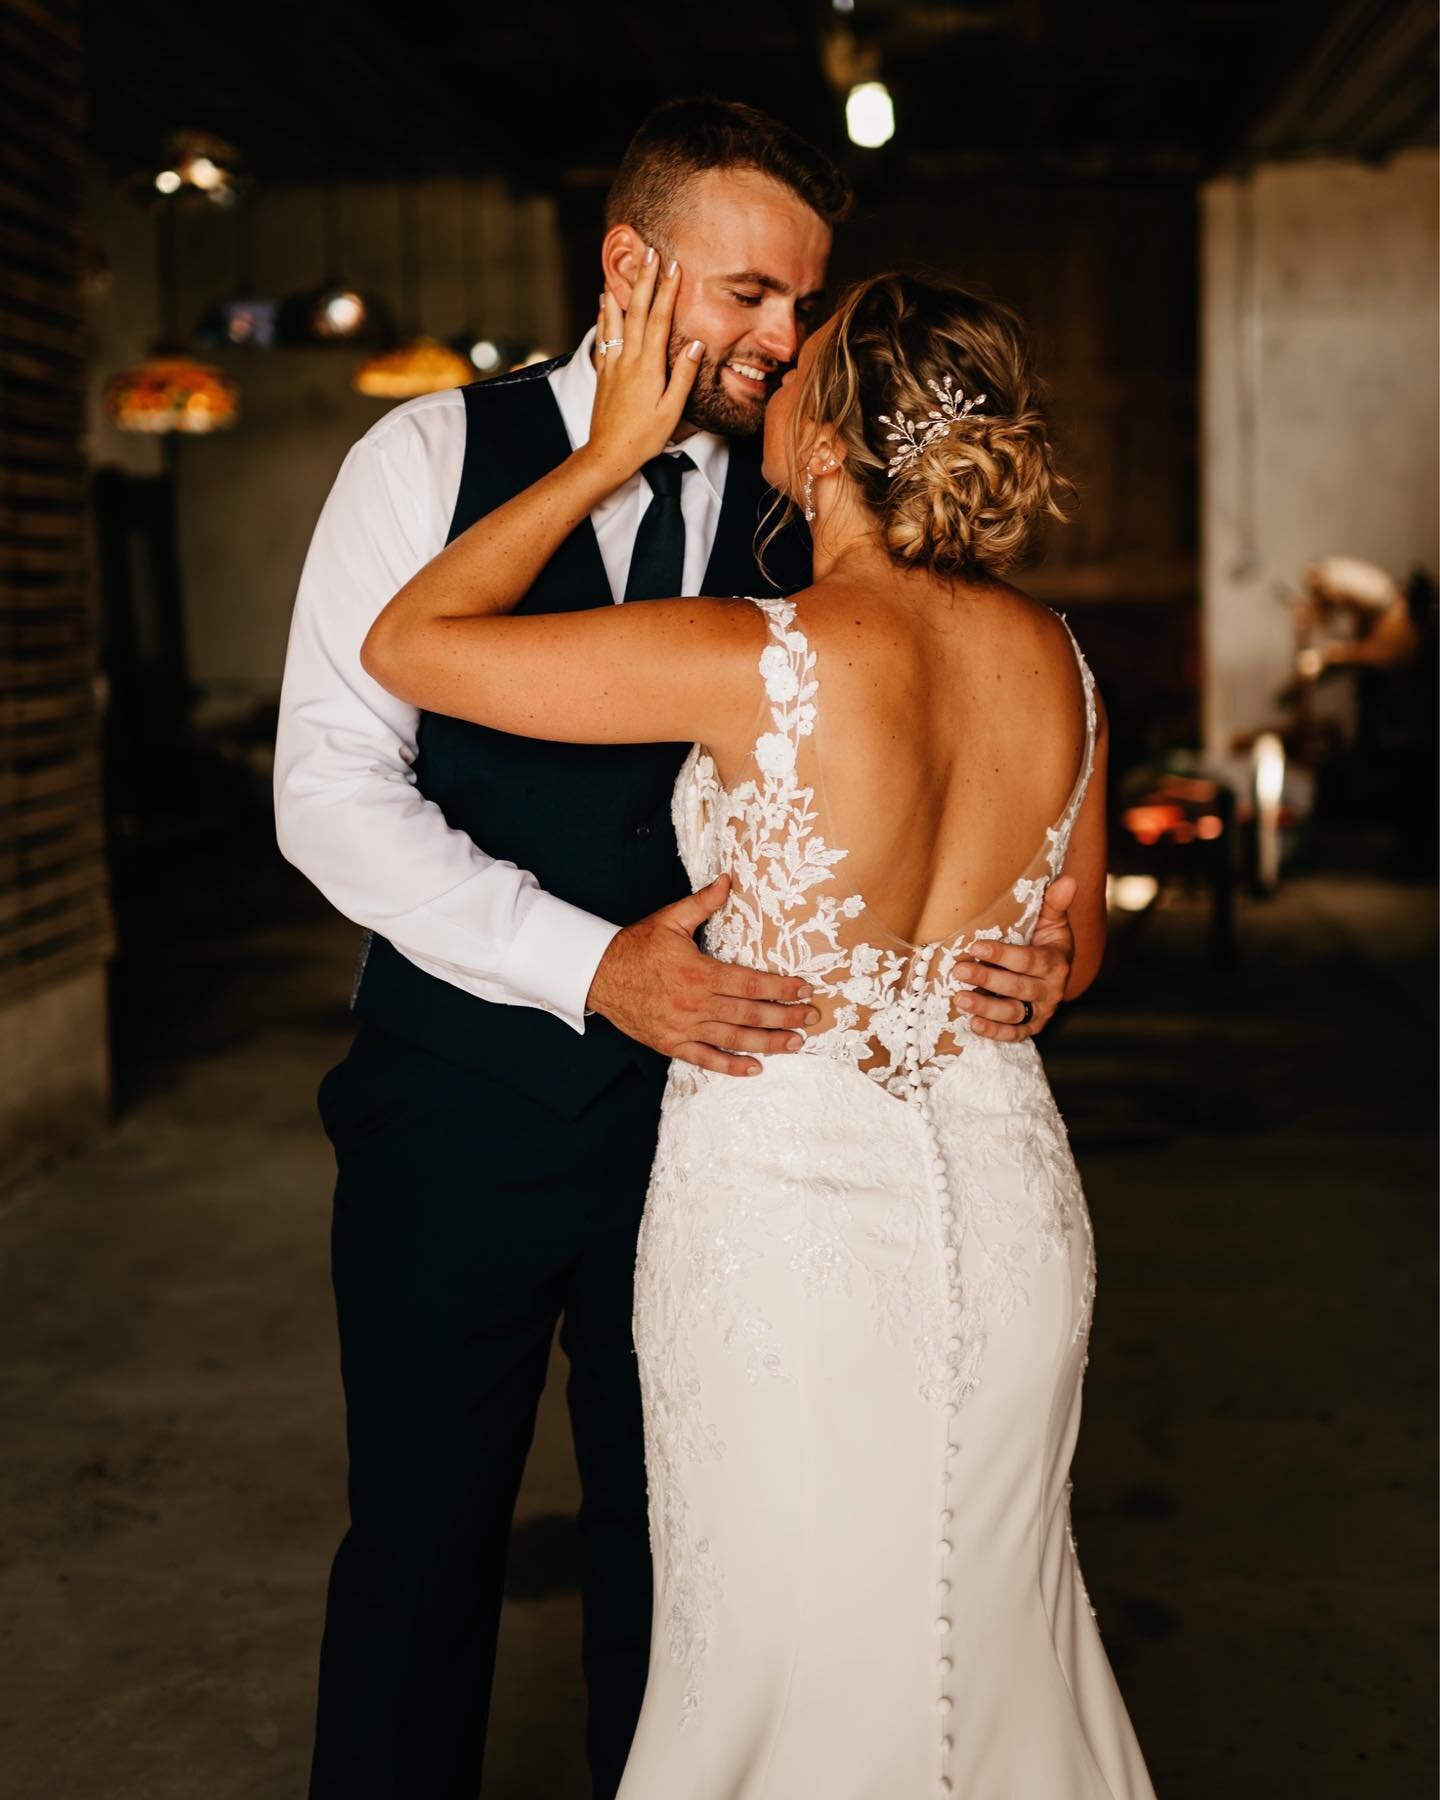 These two truly celebrated their love on this day! It was so much fun from beginning to end! Their love for one another was beautiful to see. Thank you for letting us capture it! ❤️❤️❤️